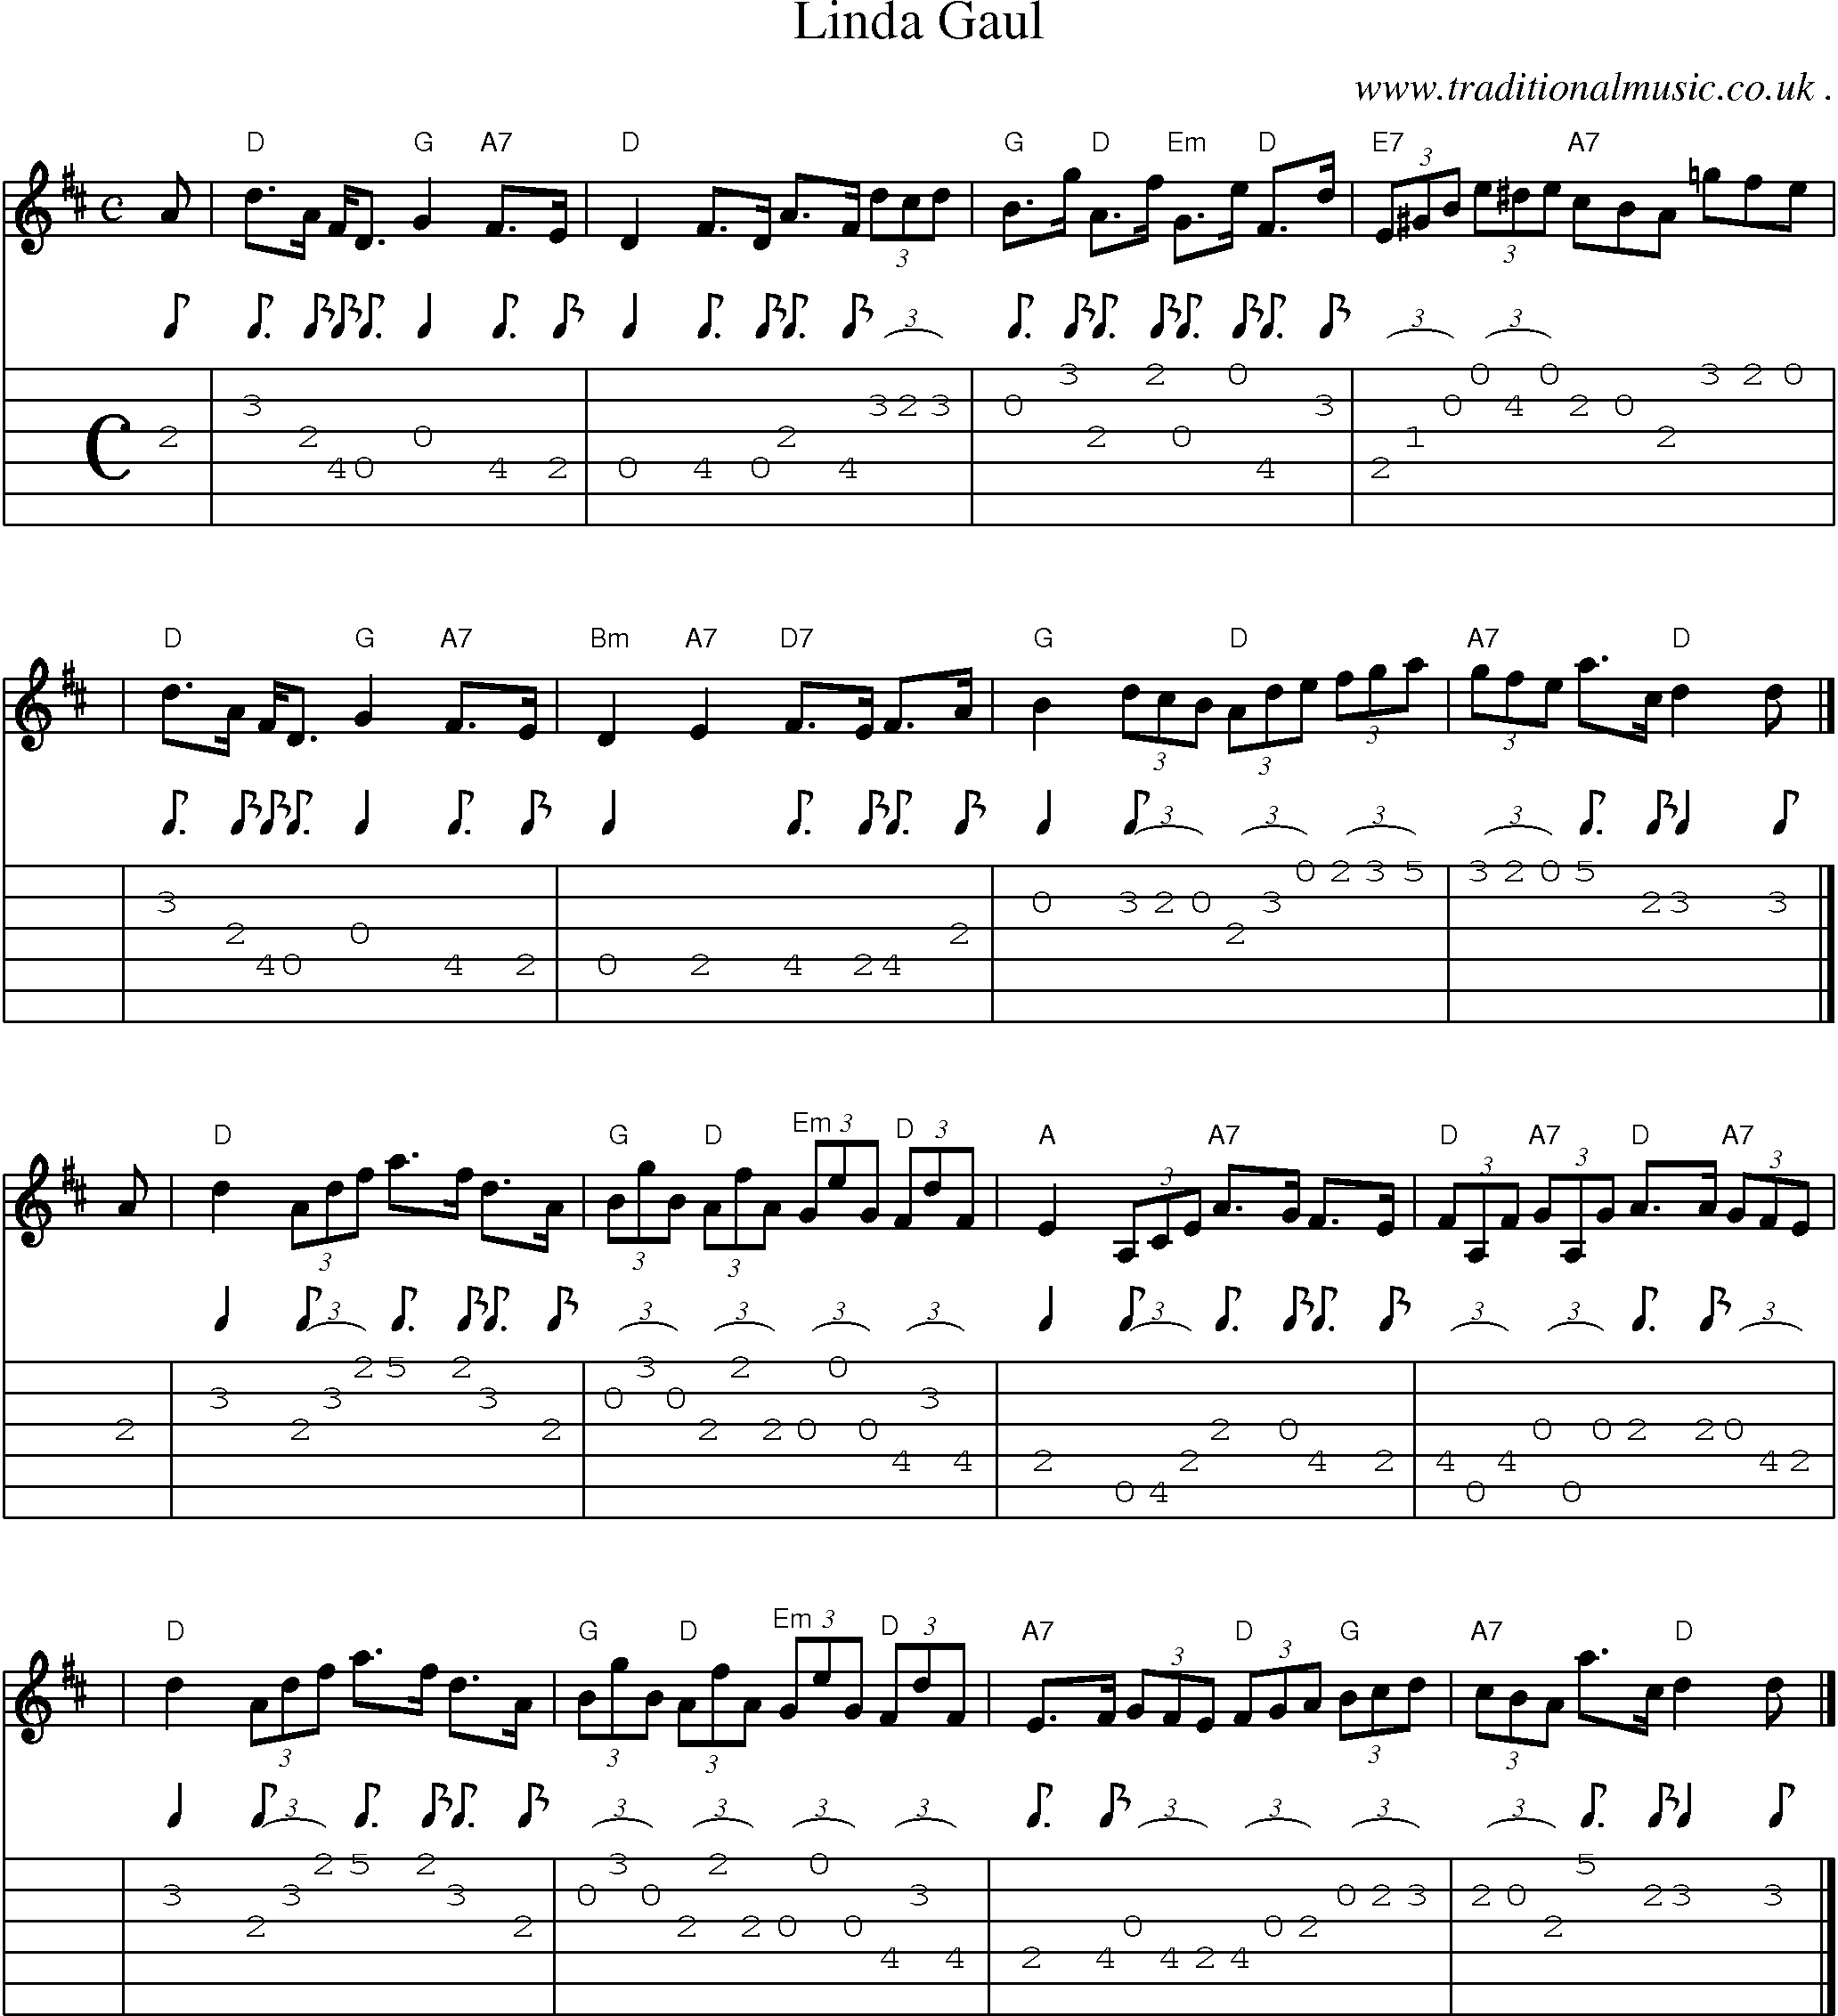 Sheet-music  score, Chords and Guitar Tabs for Linda Gaul